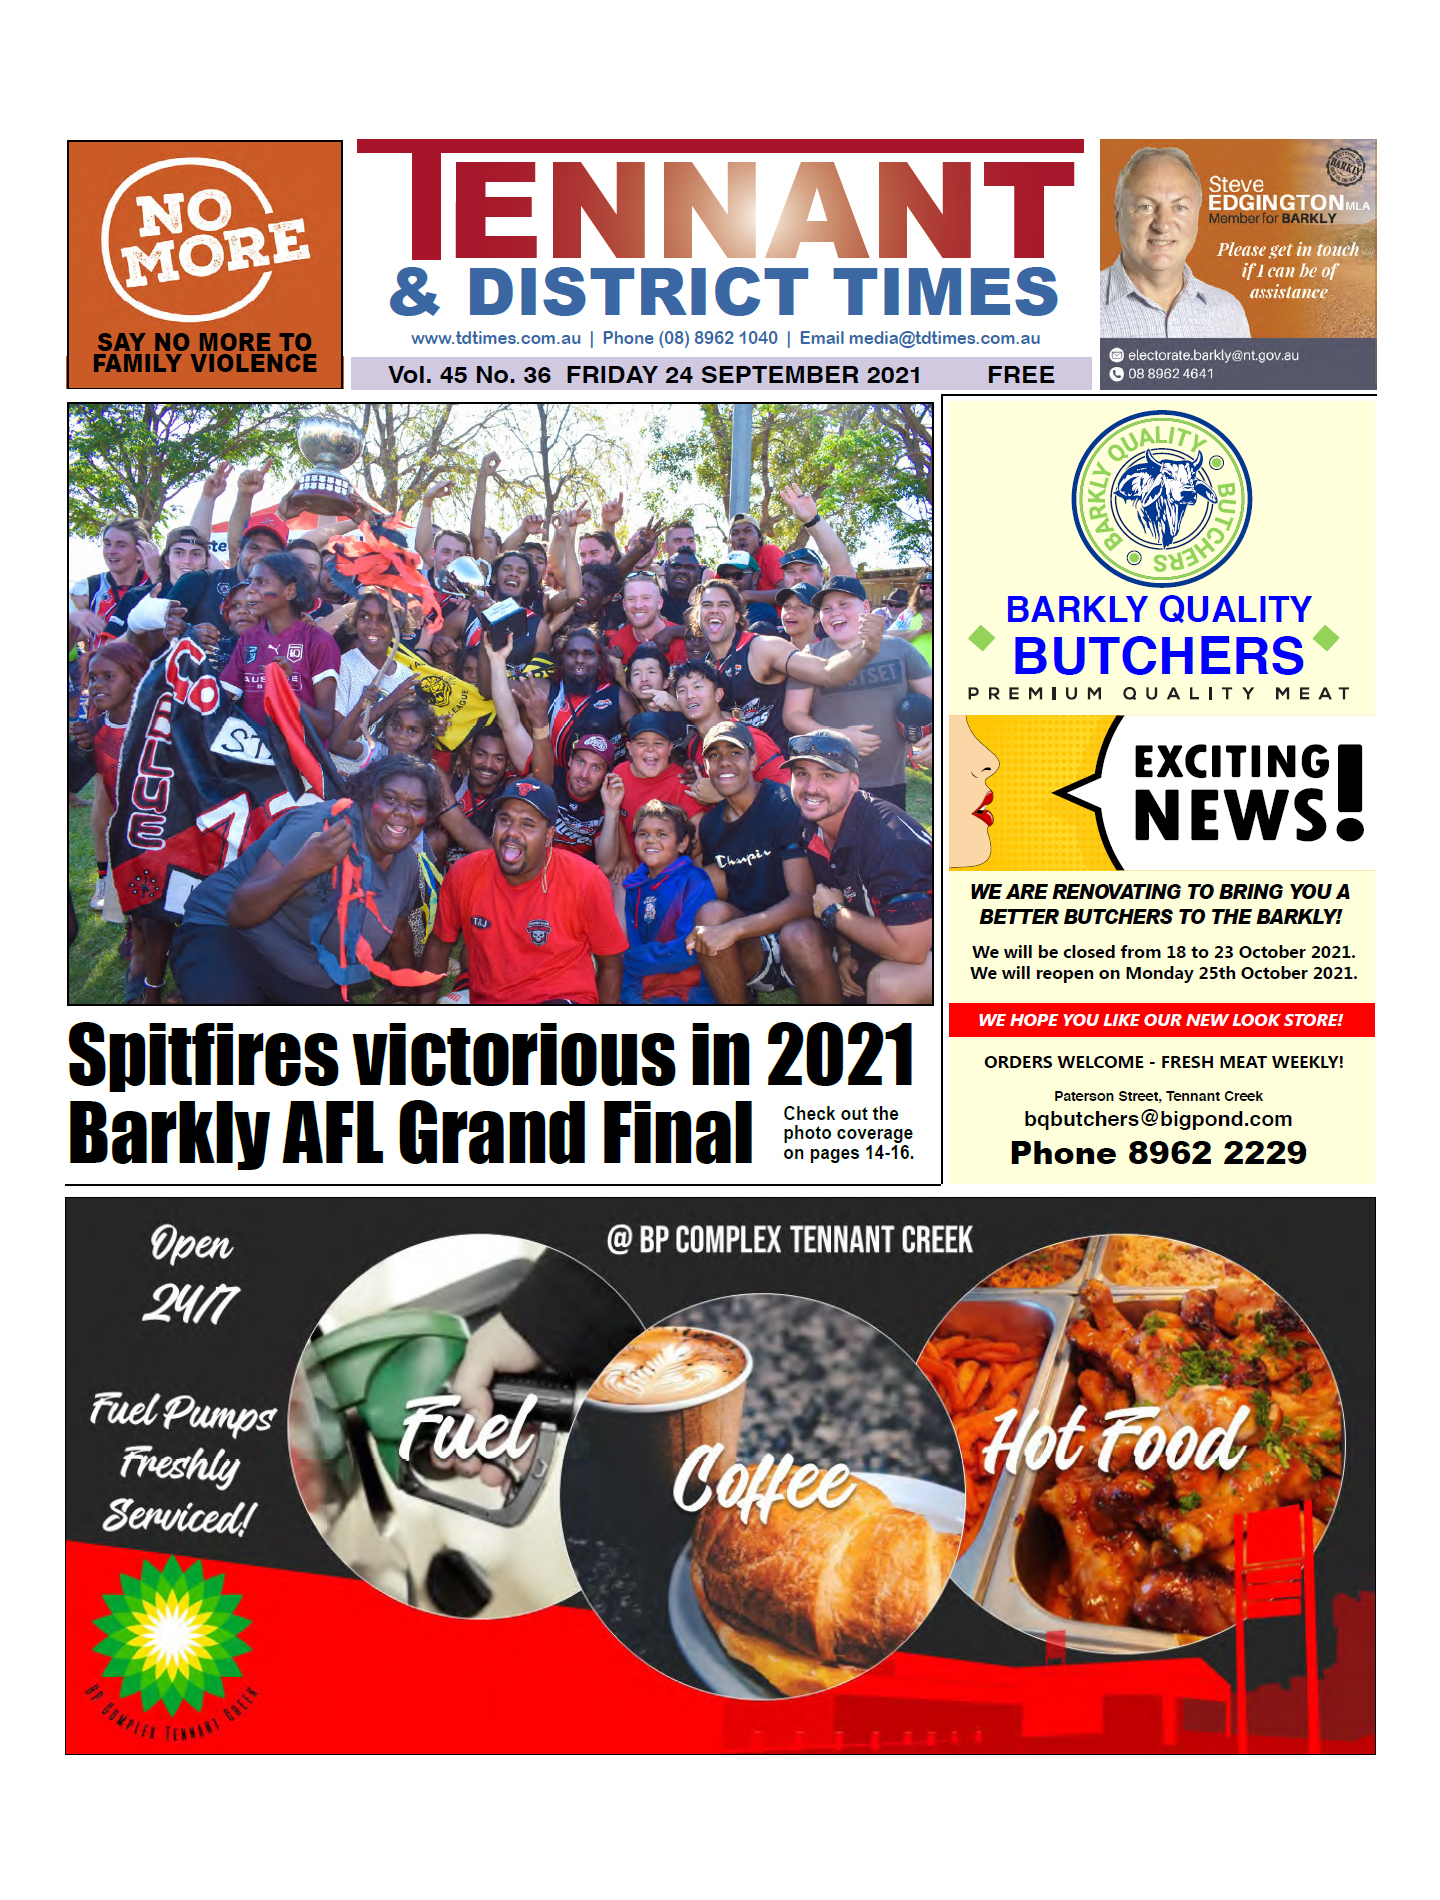 Tennant & District Times 24 September 2021